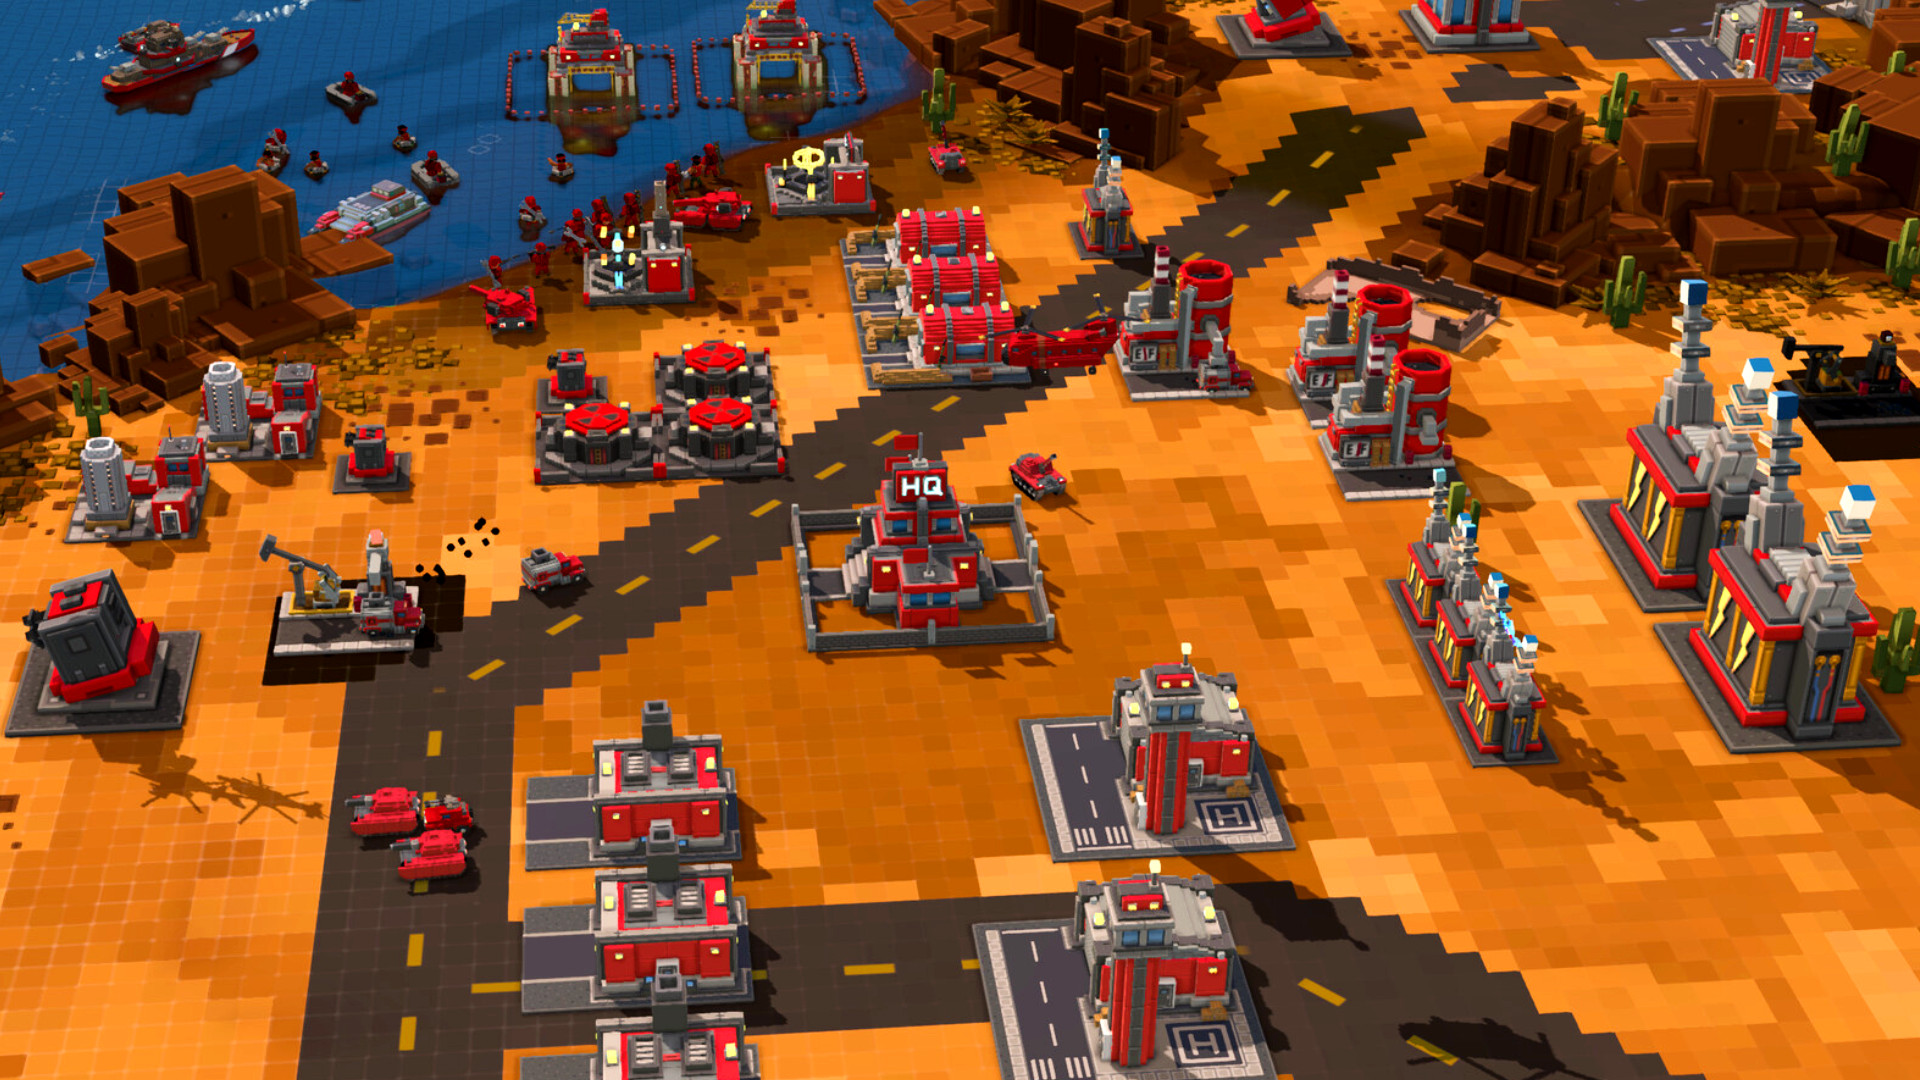 Former Command and Conquer devs have a new RTS game, out now on Steam